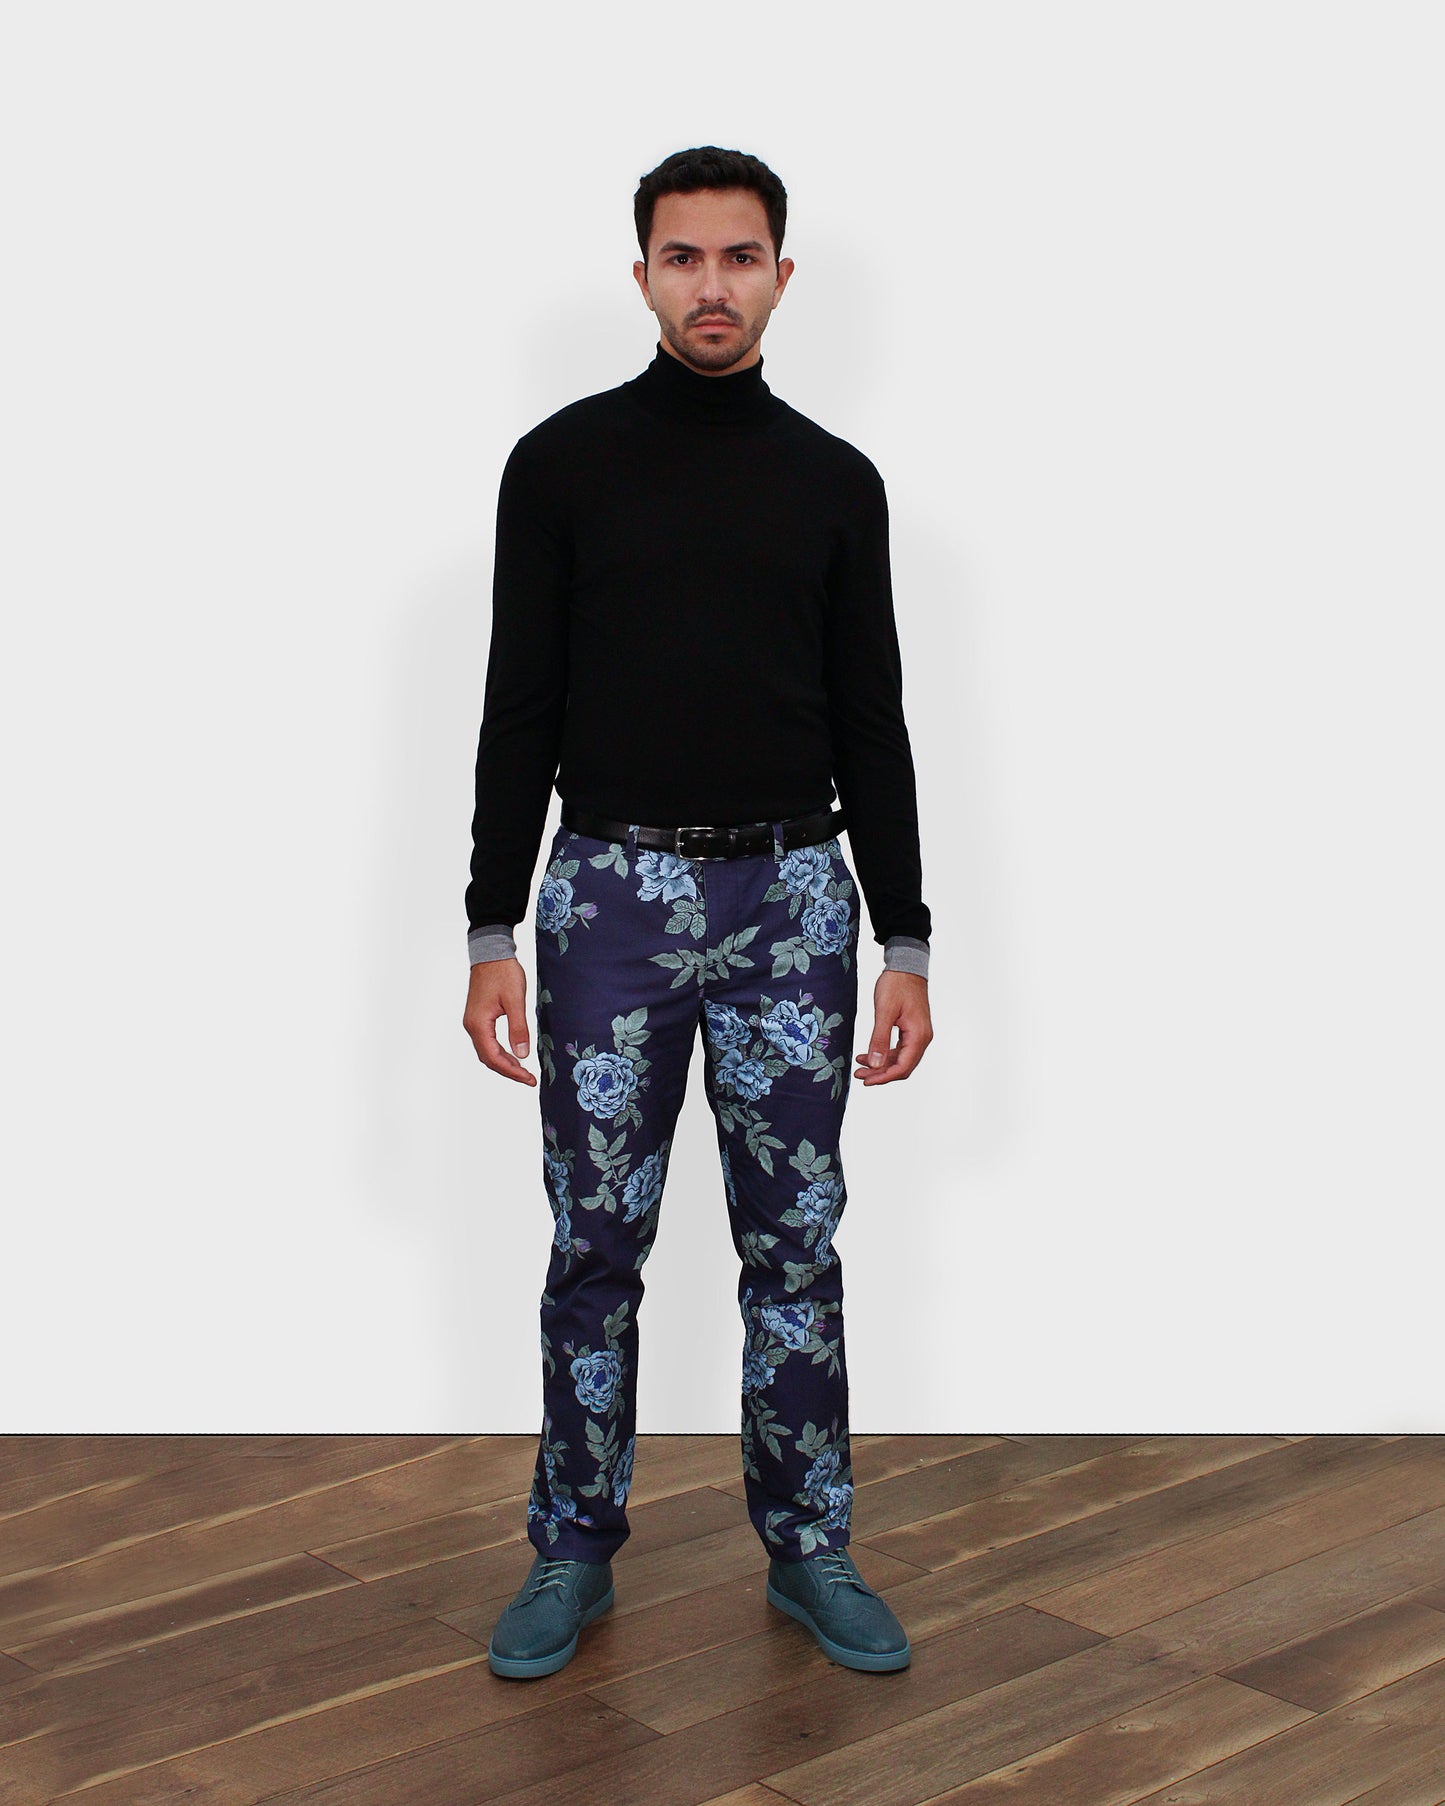 JACK LUX FLOATING FORNA PANT IN SKIPPER